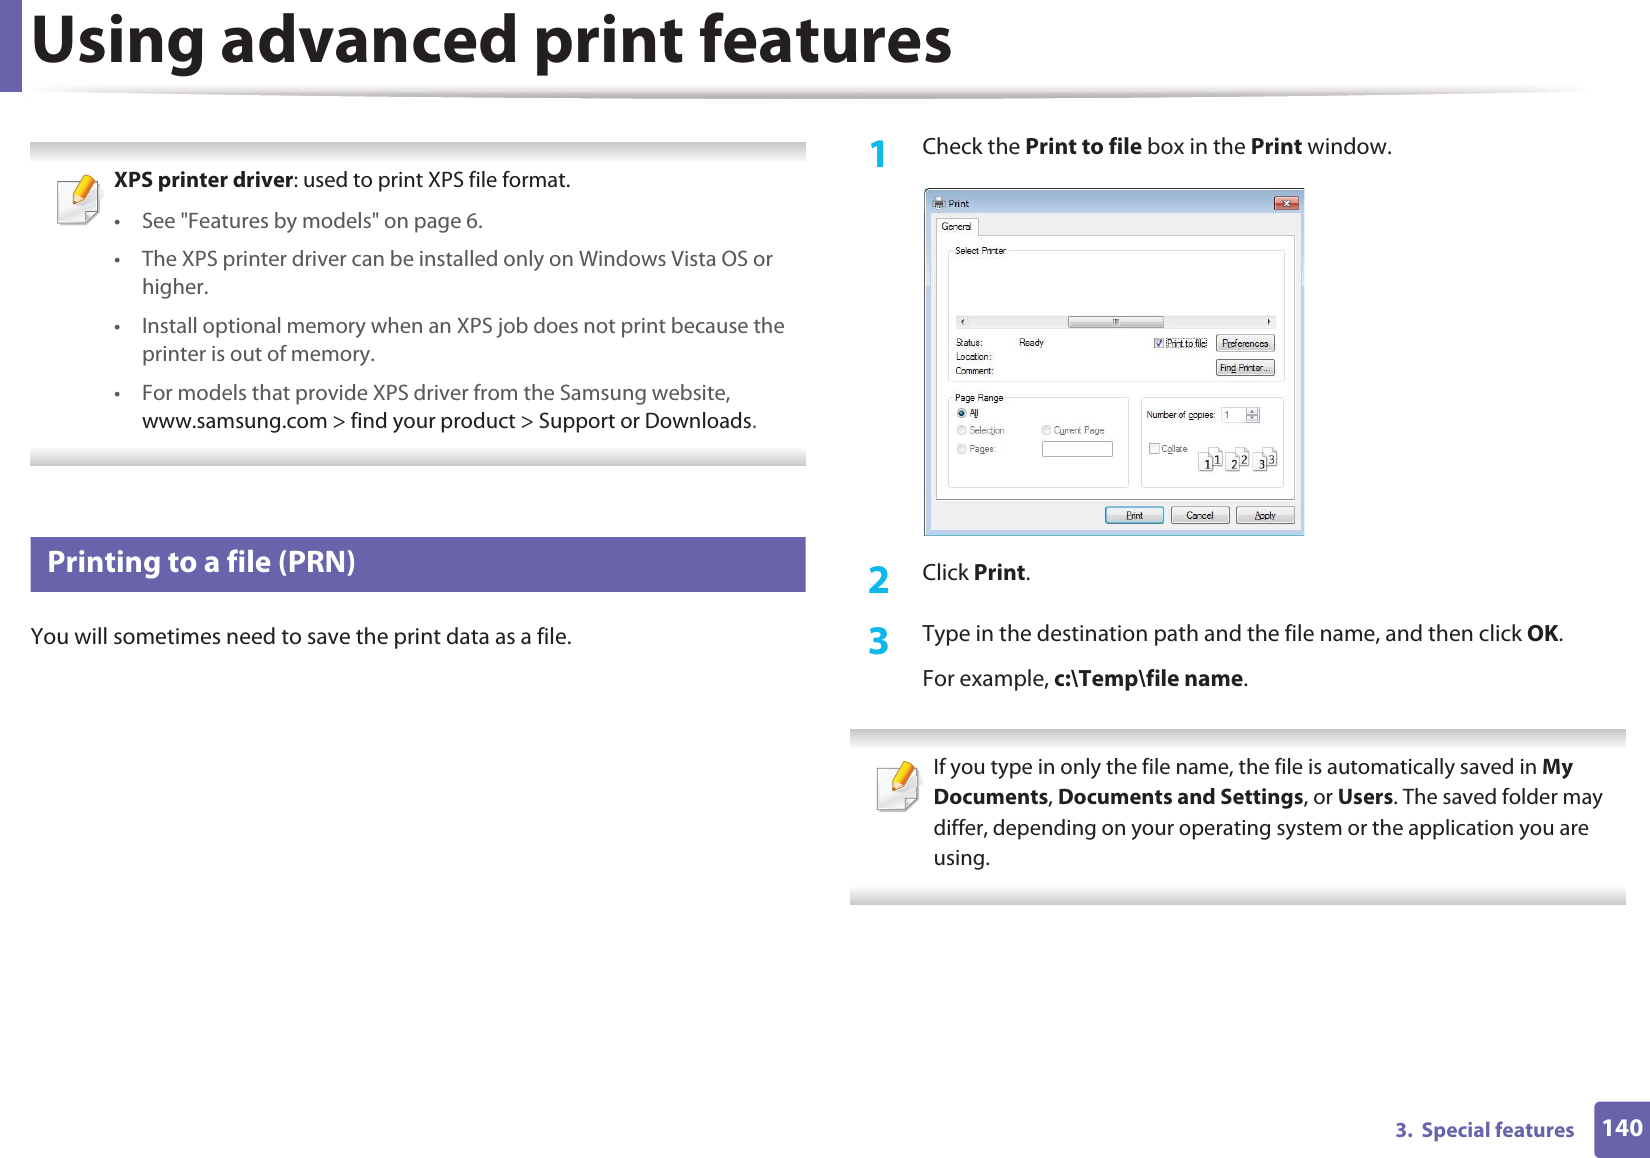 1403.  Special featuresUsing advanced print features XPS printer driver: used to print XPS file format. • See &quot;Features by models&quot; on page 6.• The XPS printer driver can be installed only on Windows Vista OS or higher.• Install optional memory when an XPS job does not print because the printer is out of memory.• For models that provide XPS driver from the Samsung website, www.samsung.com &gt; find your product &gt; Support or Downloads. 1 Printing to a file (PRN)You will sometimes need to save the print data as a file. 1Check the Print to file box in the Print window.2  Click Print.3  Type in the destination path and the file name, and then click OK.For example, c:\Temp\file name. If you type in only the file name, the file is automatically saved in My Documents, Documents and Settings, or Users. The saved folder may differ, depending on your operating system or the application you are using. 